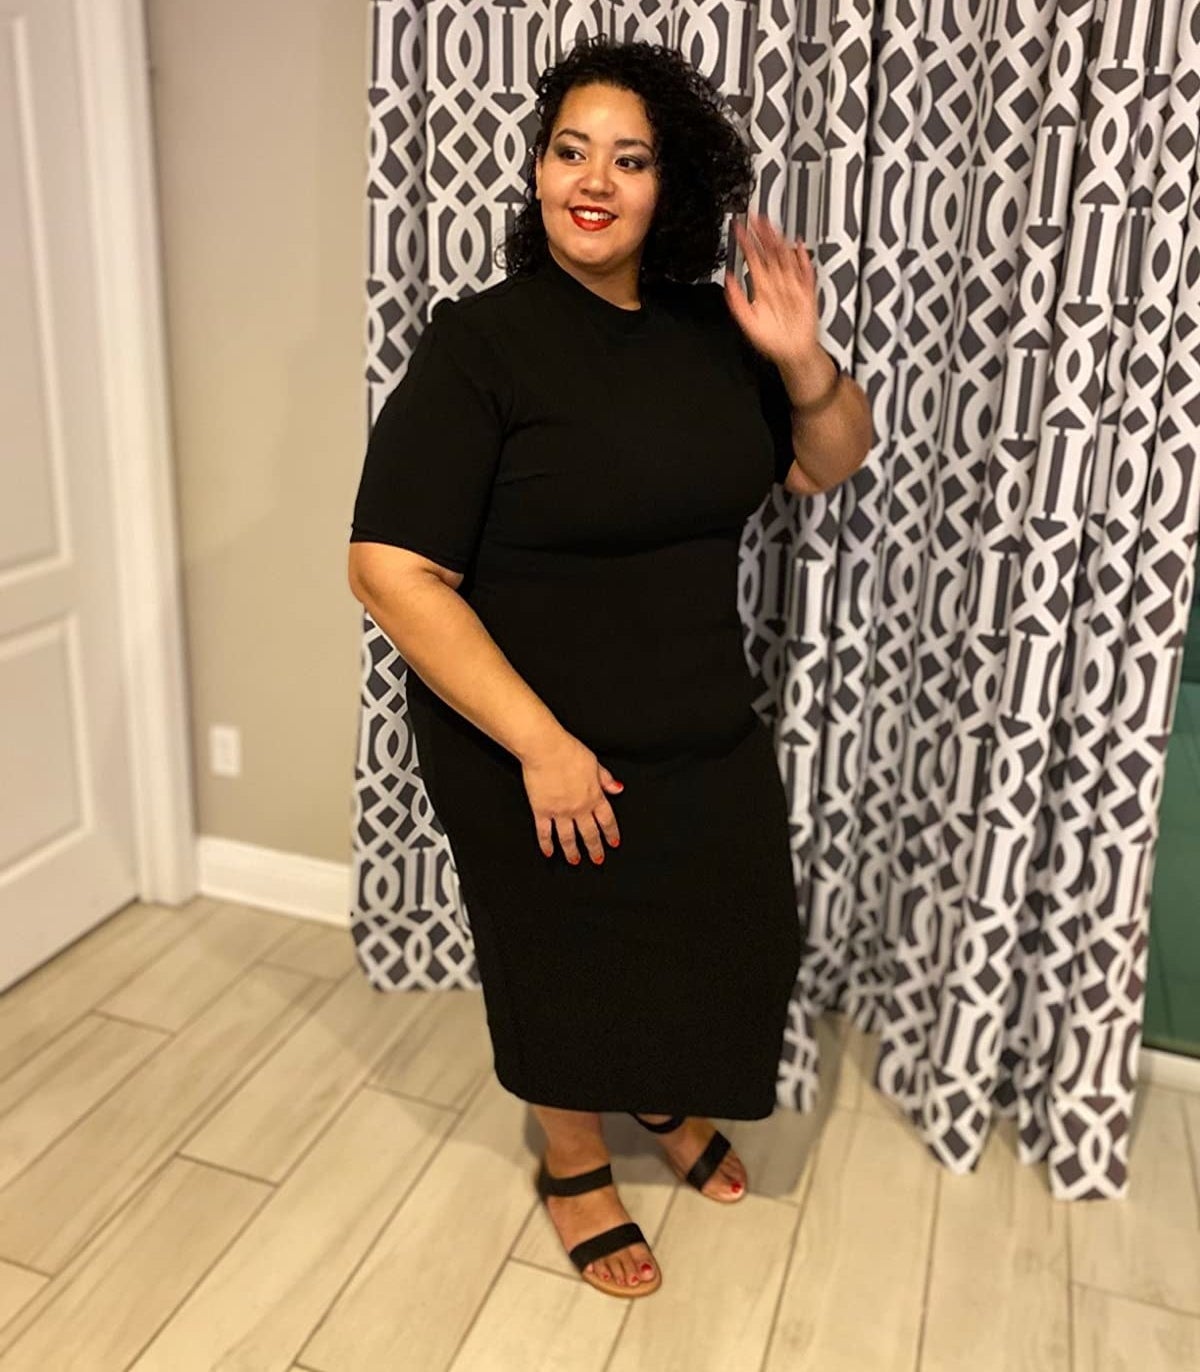 A reviewer photo of the dress in black